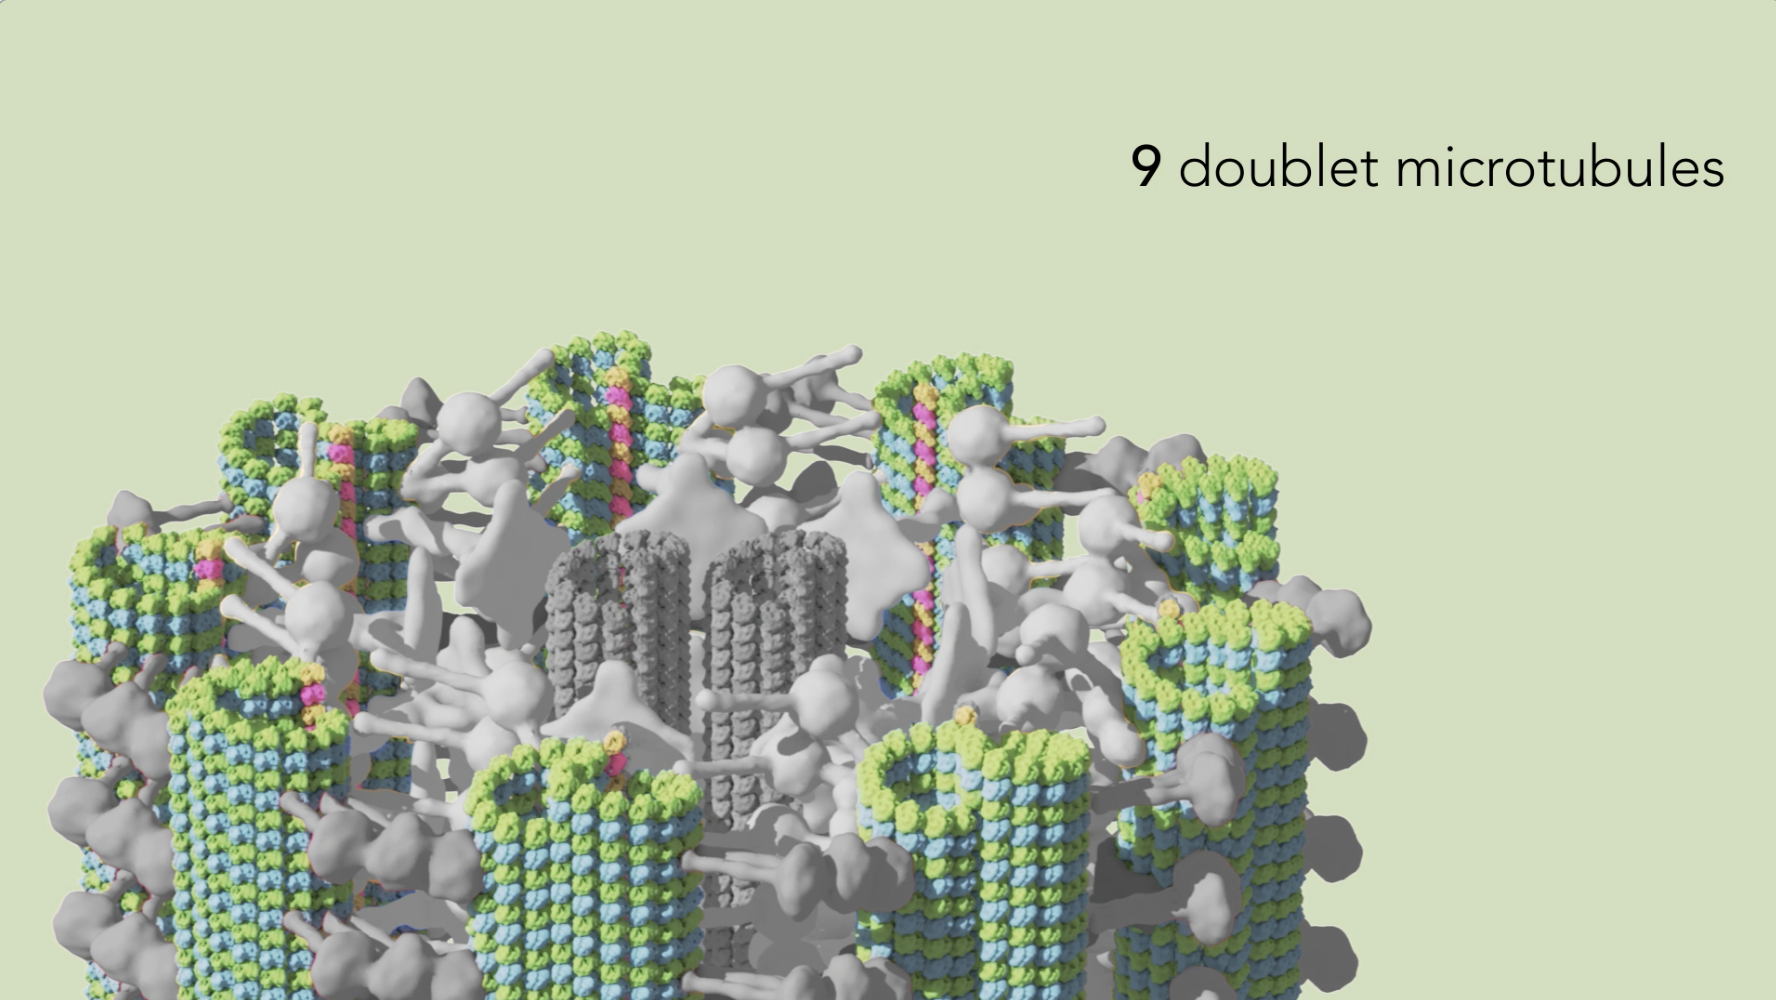 Illustration shows a ring in gray with 9 structures in green. Title says "9 doublet microtubules."